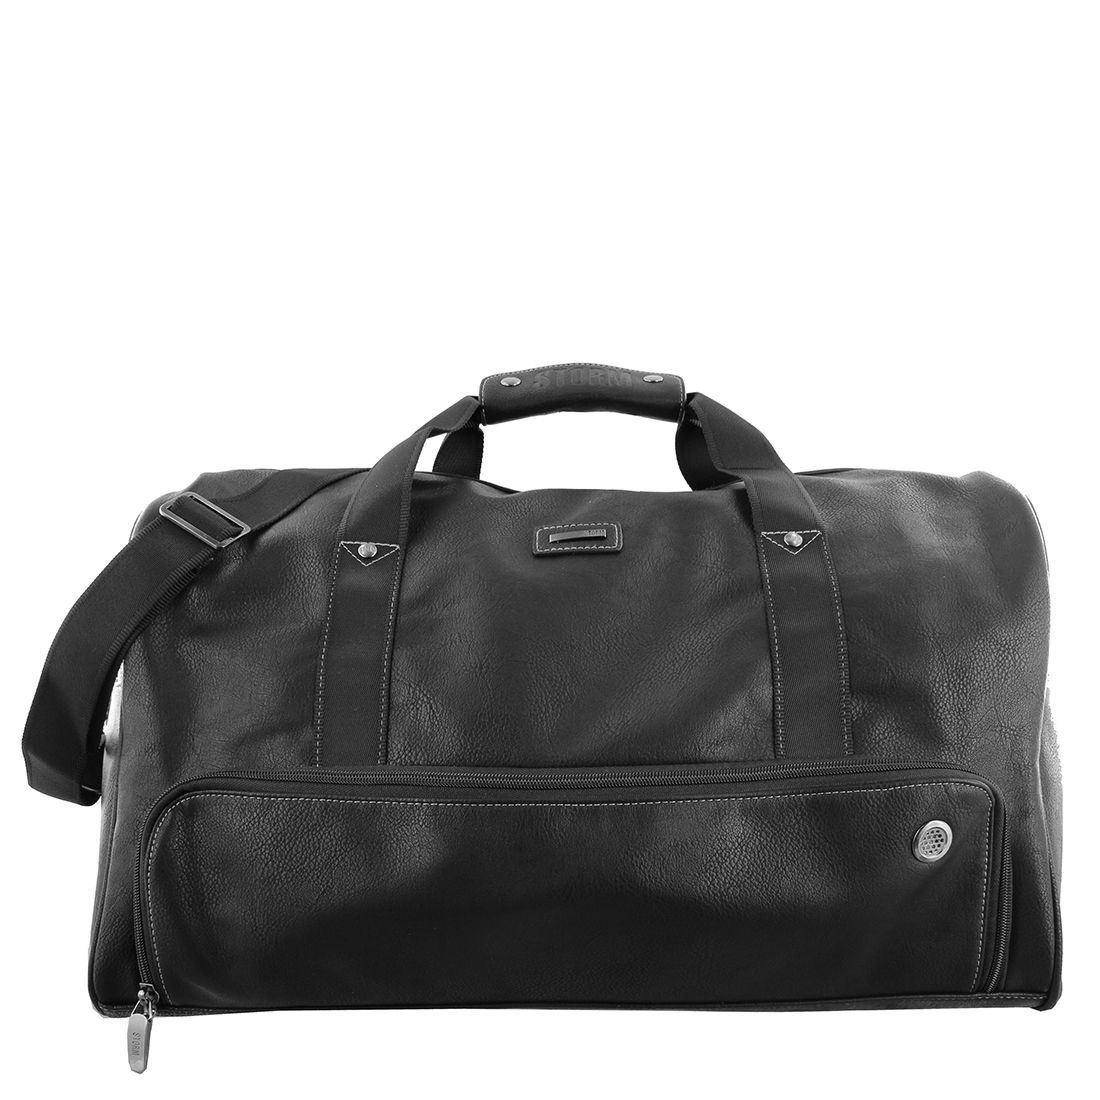 Men's STORM Norton Holdall Black Bag (6STABY10/BR) - StormWatches.com ...